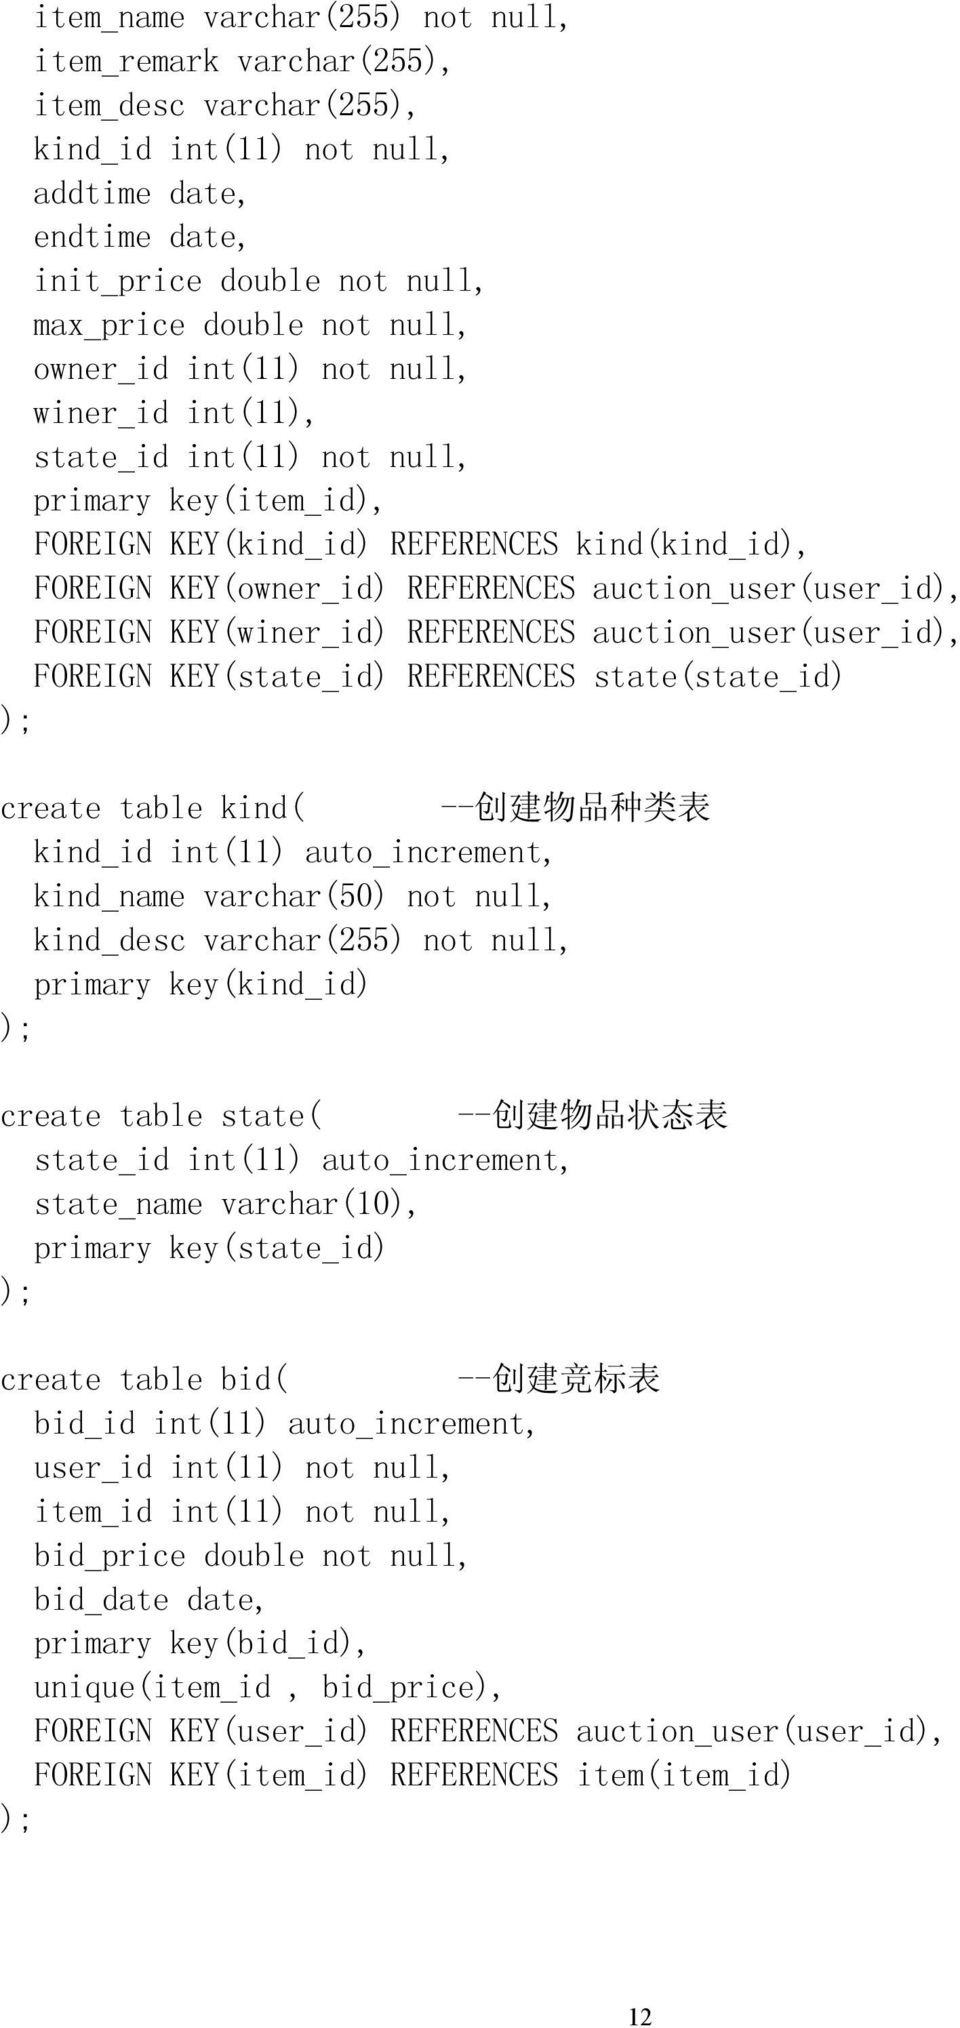 FOREIGN KEY(winer_id) REFERENCES auction_user(user_id), FOREIGN KEY(state_id) REFERENCES state(state_id) ); create table kind( -- 创 建 物 品 种 类 表 kind_id int(11) auto_increment, kind_name varchar(50)